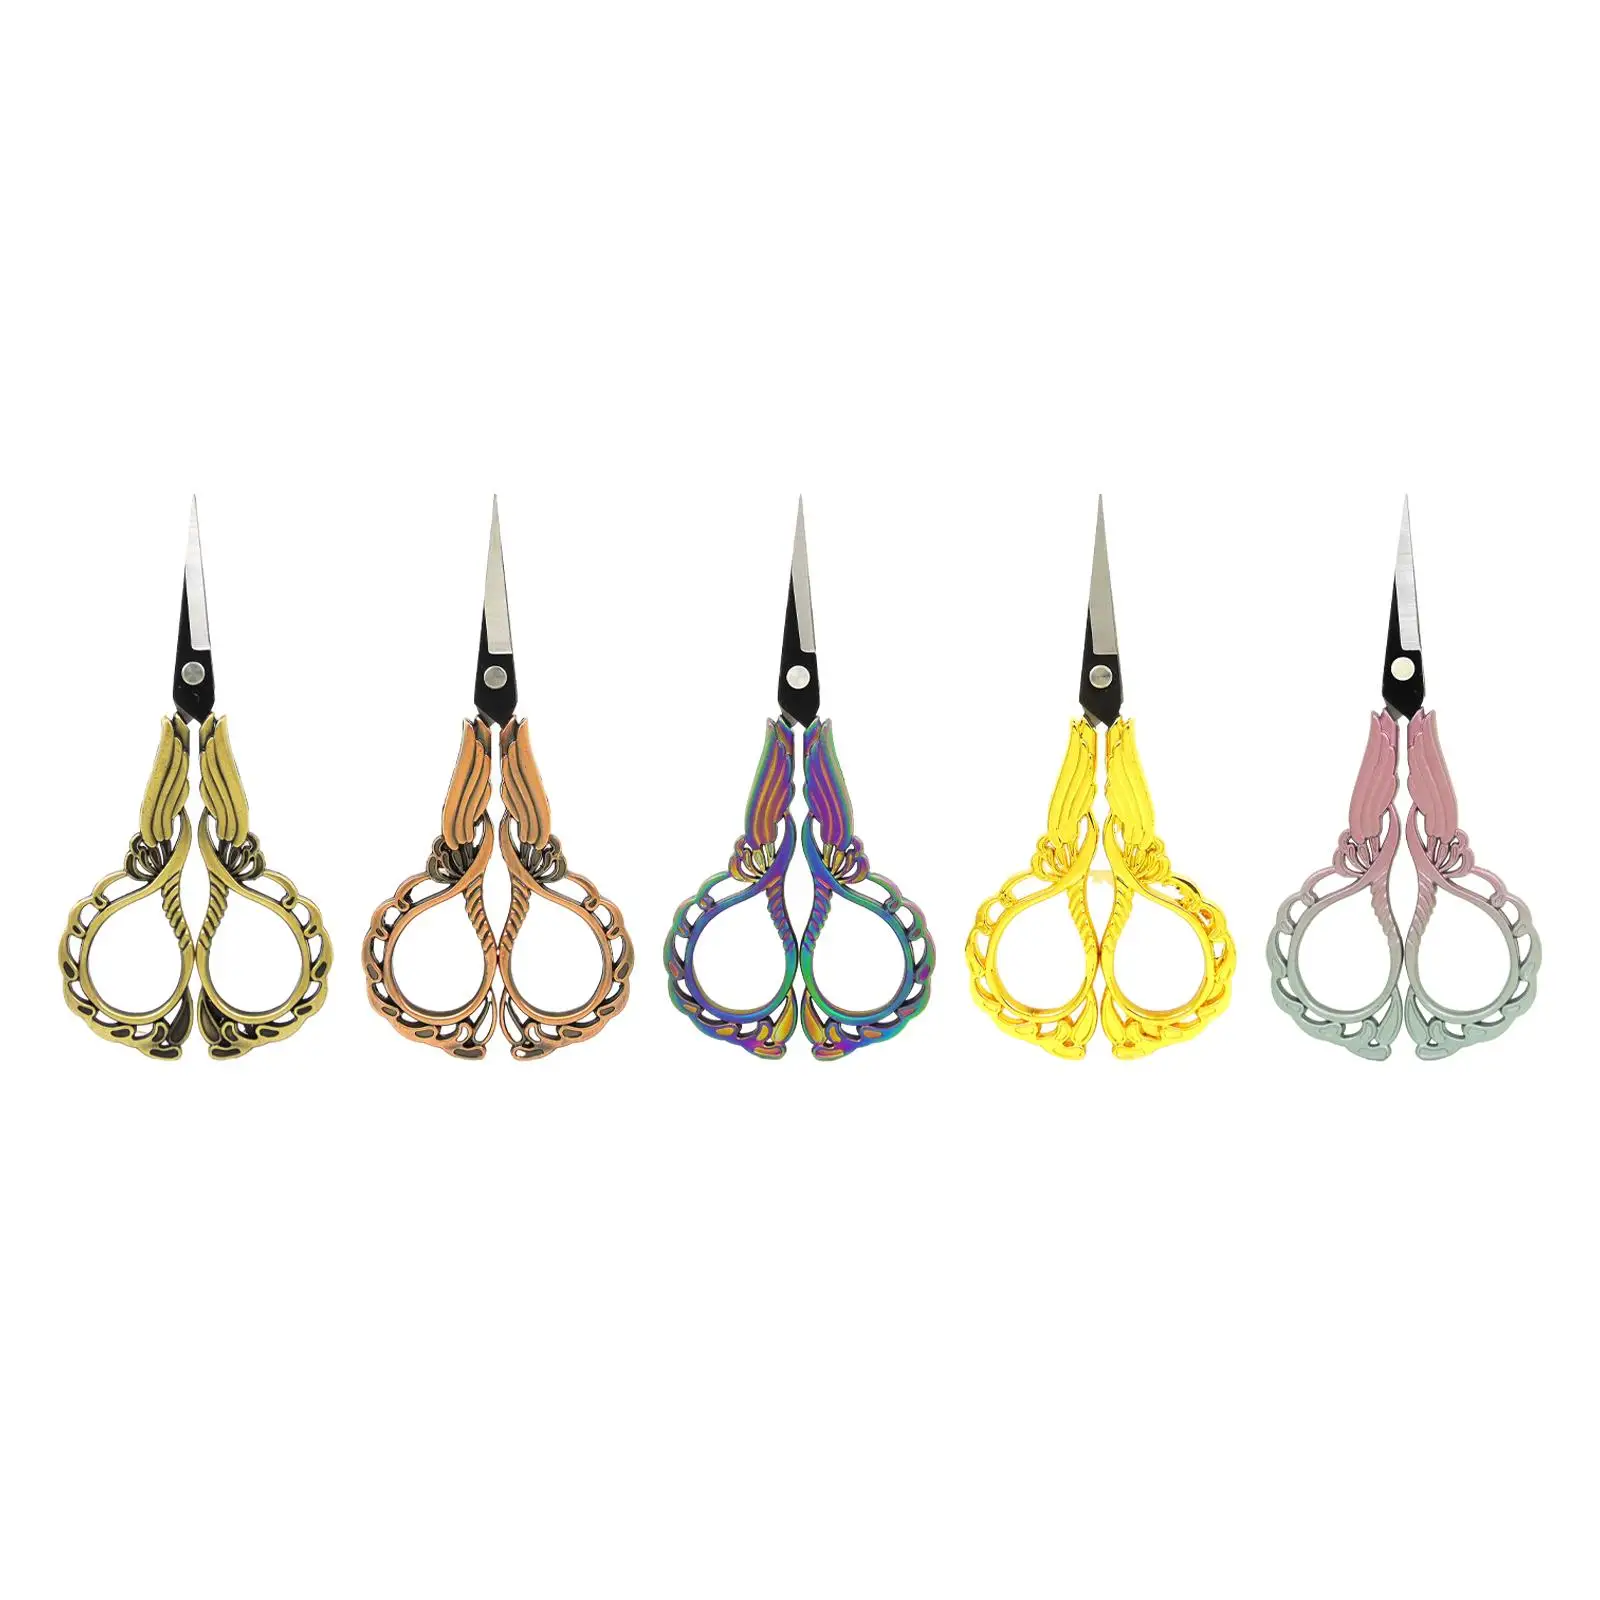 Embroidery Scissors Retro Style Cutting Tool Orchid Scissors for Cloth Cutting Household Artwork Sewing Accessories DIY Fabric